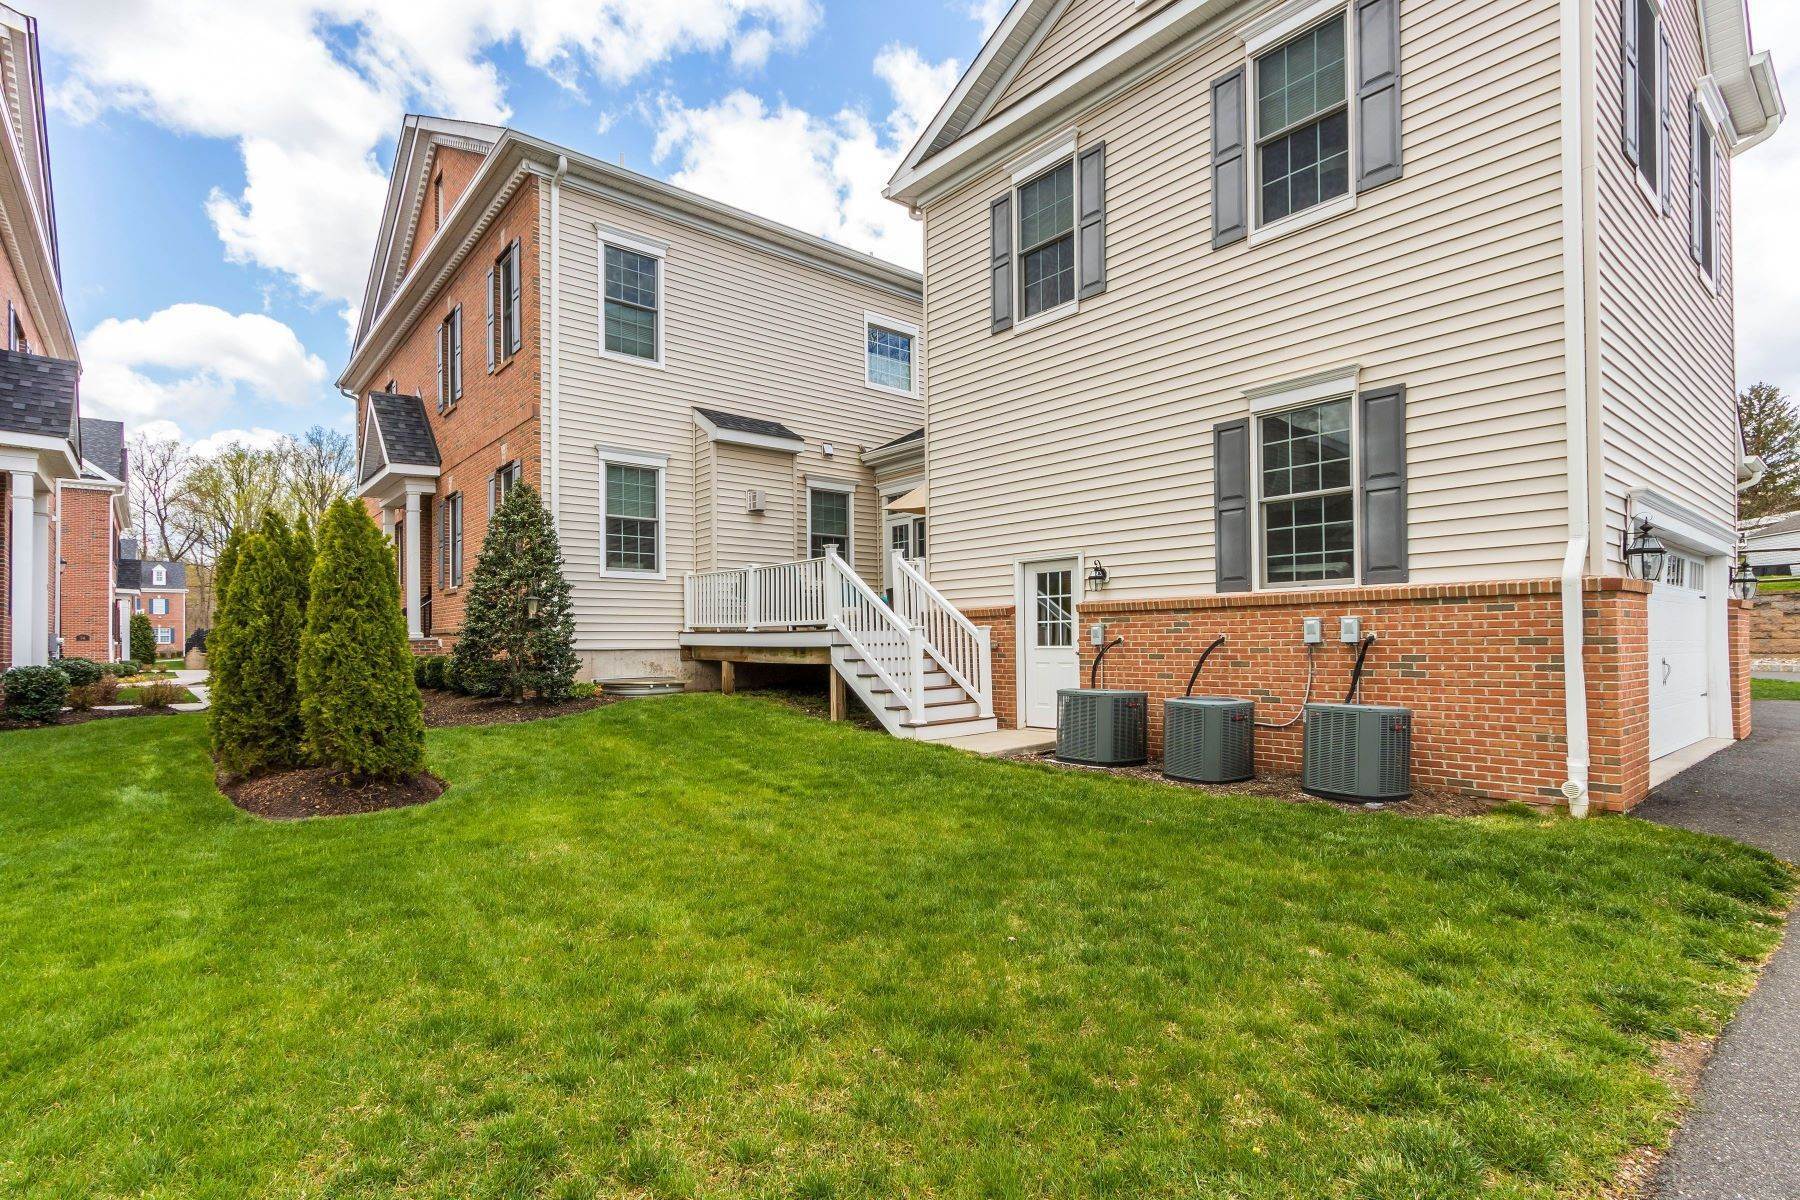 43. Townhouse for Sale at 73 Creekview Lane, Yardley, PA 19067 73 Creekview Lane Yardley, Pennsylvania 19067 United States